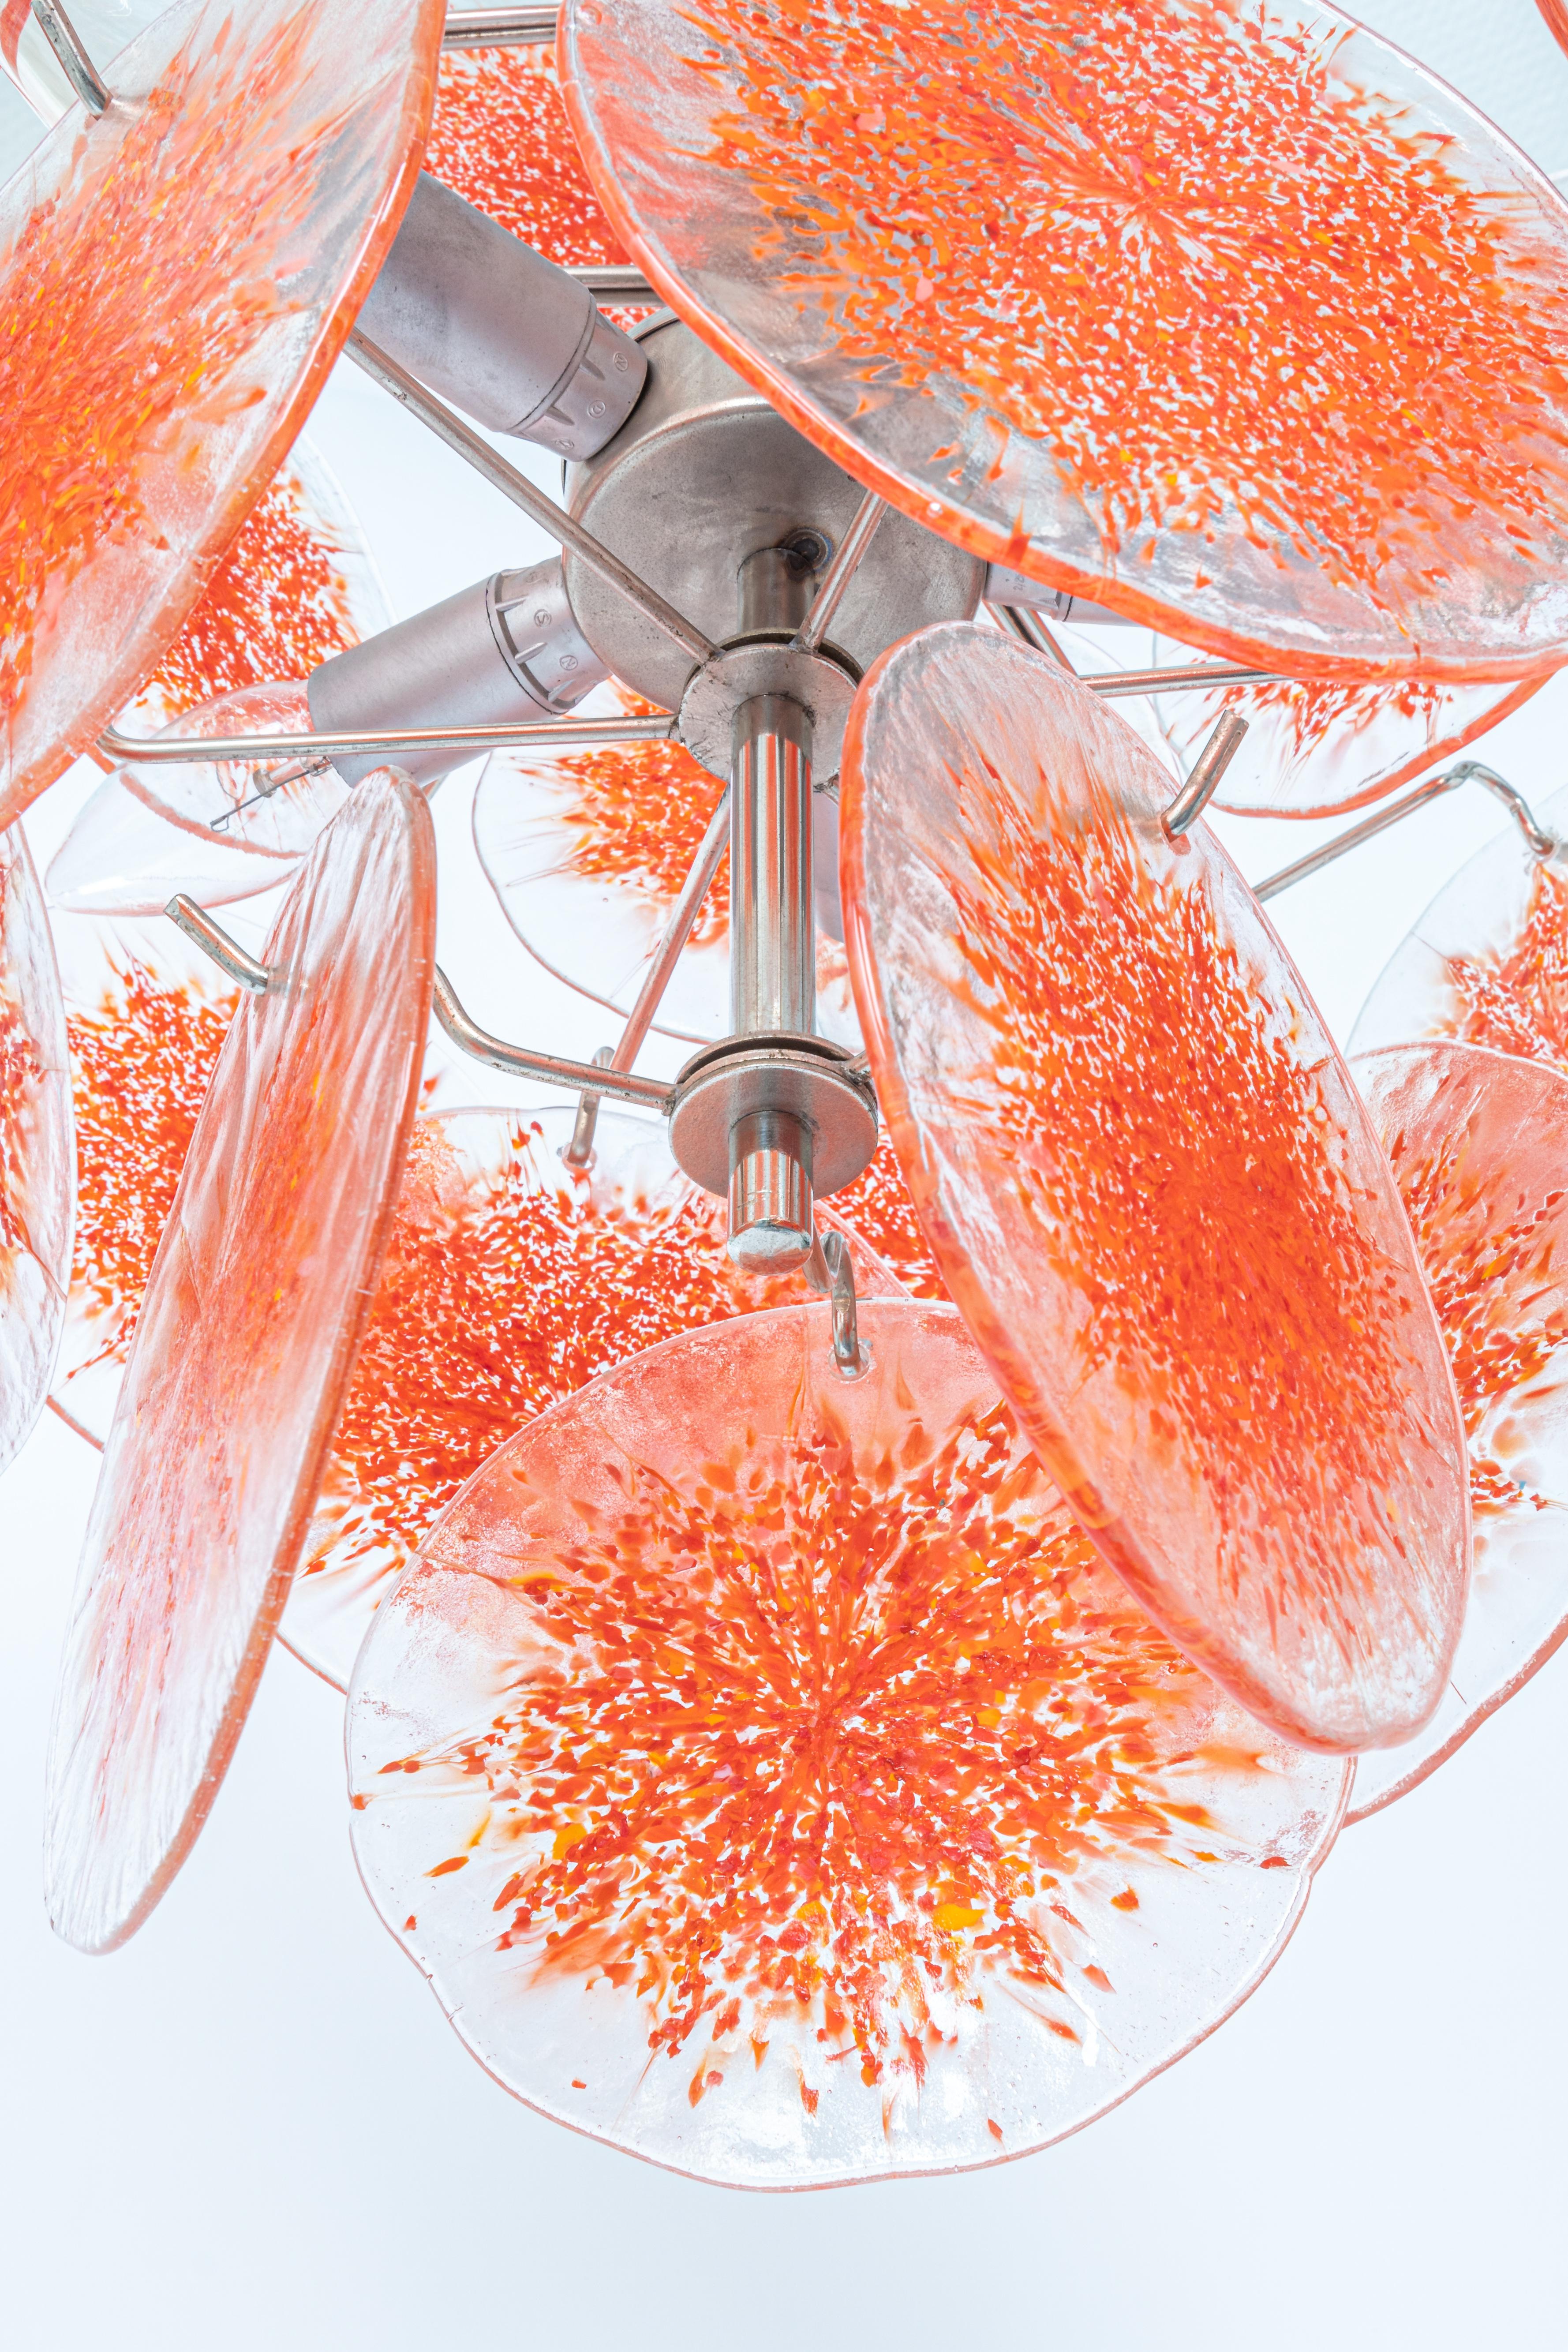 Mid-20th Century Vistosi Smoked Glass Disc Chandelier, Italy, 1960s For Sale